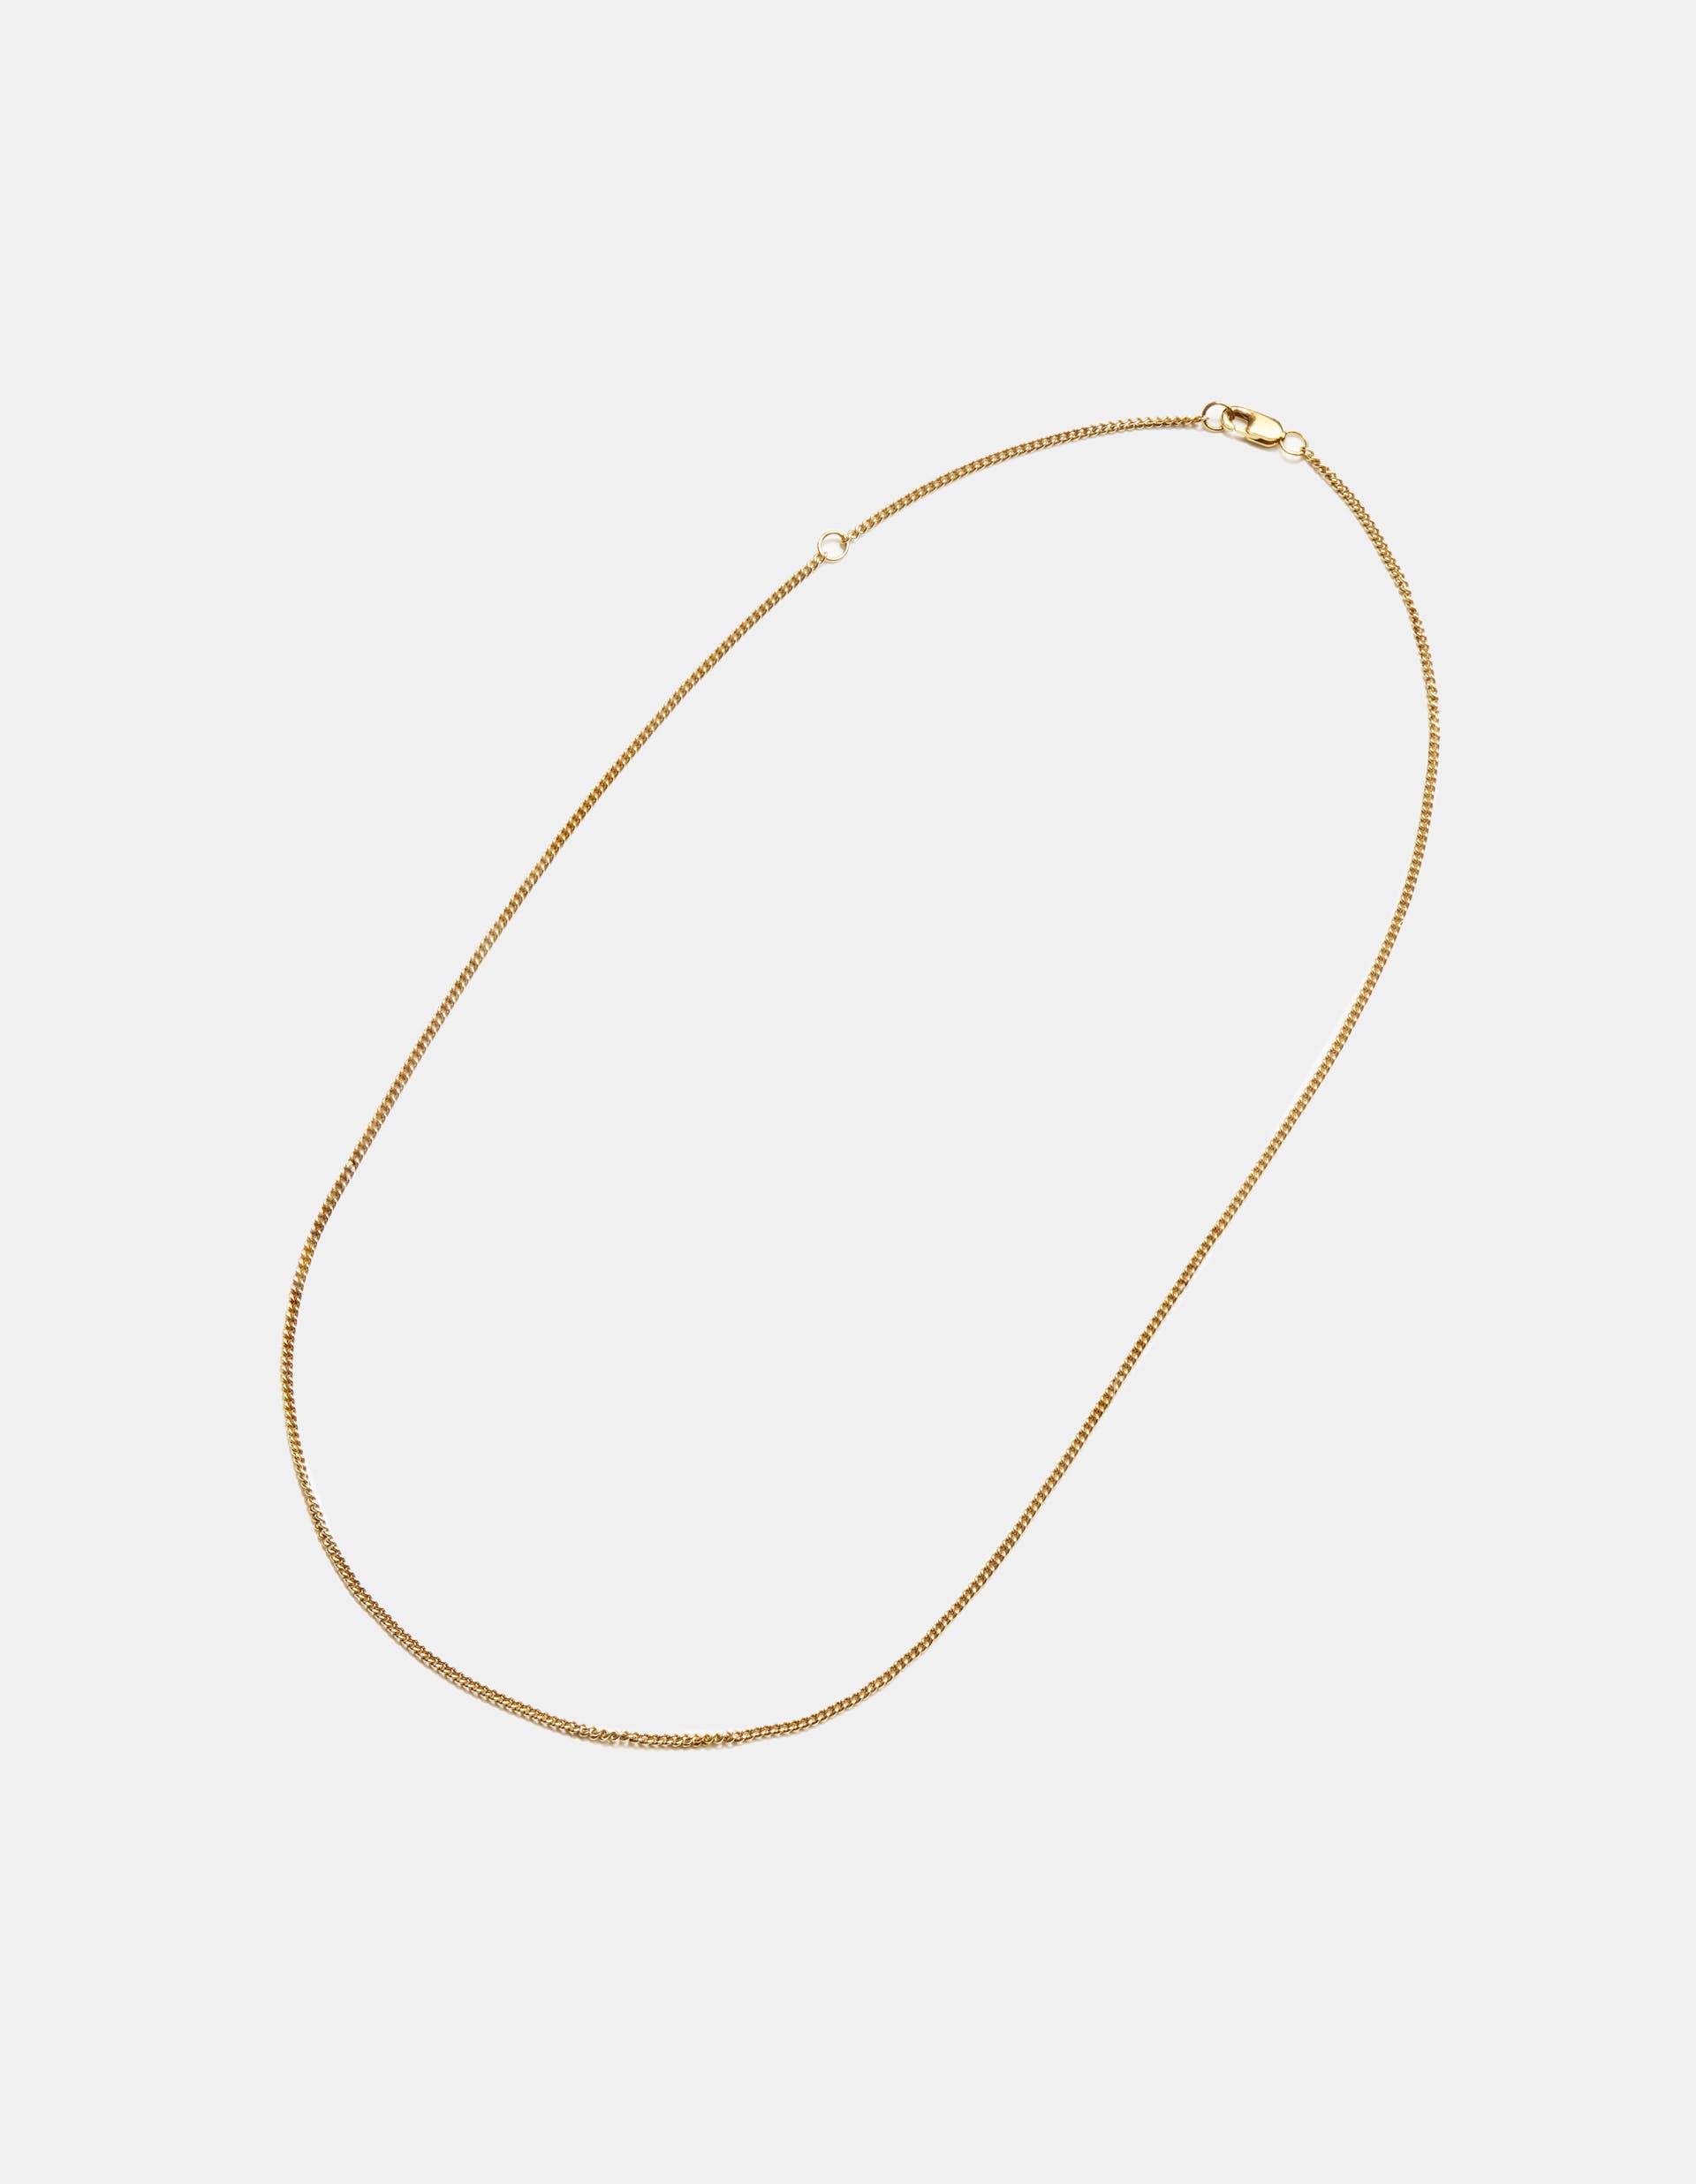 Yellow Gold Adjustable Diamond Cut Spiga Chain Necklace 1.6mm | REEDS  Jewelers